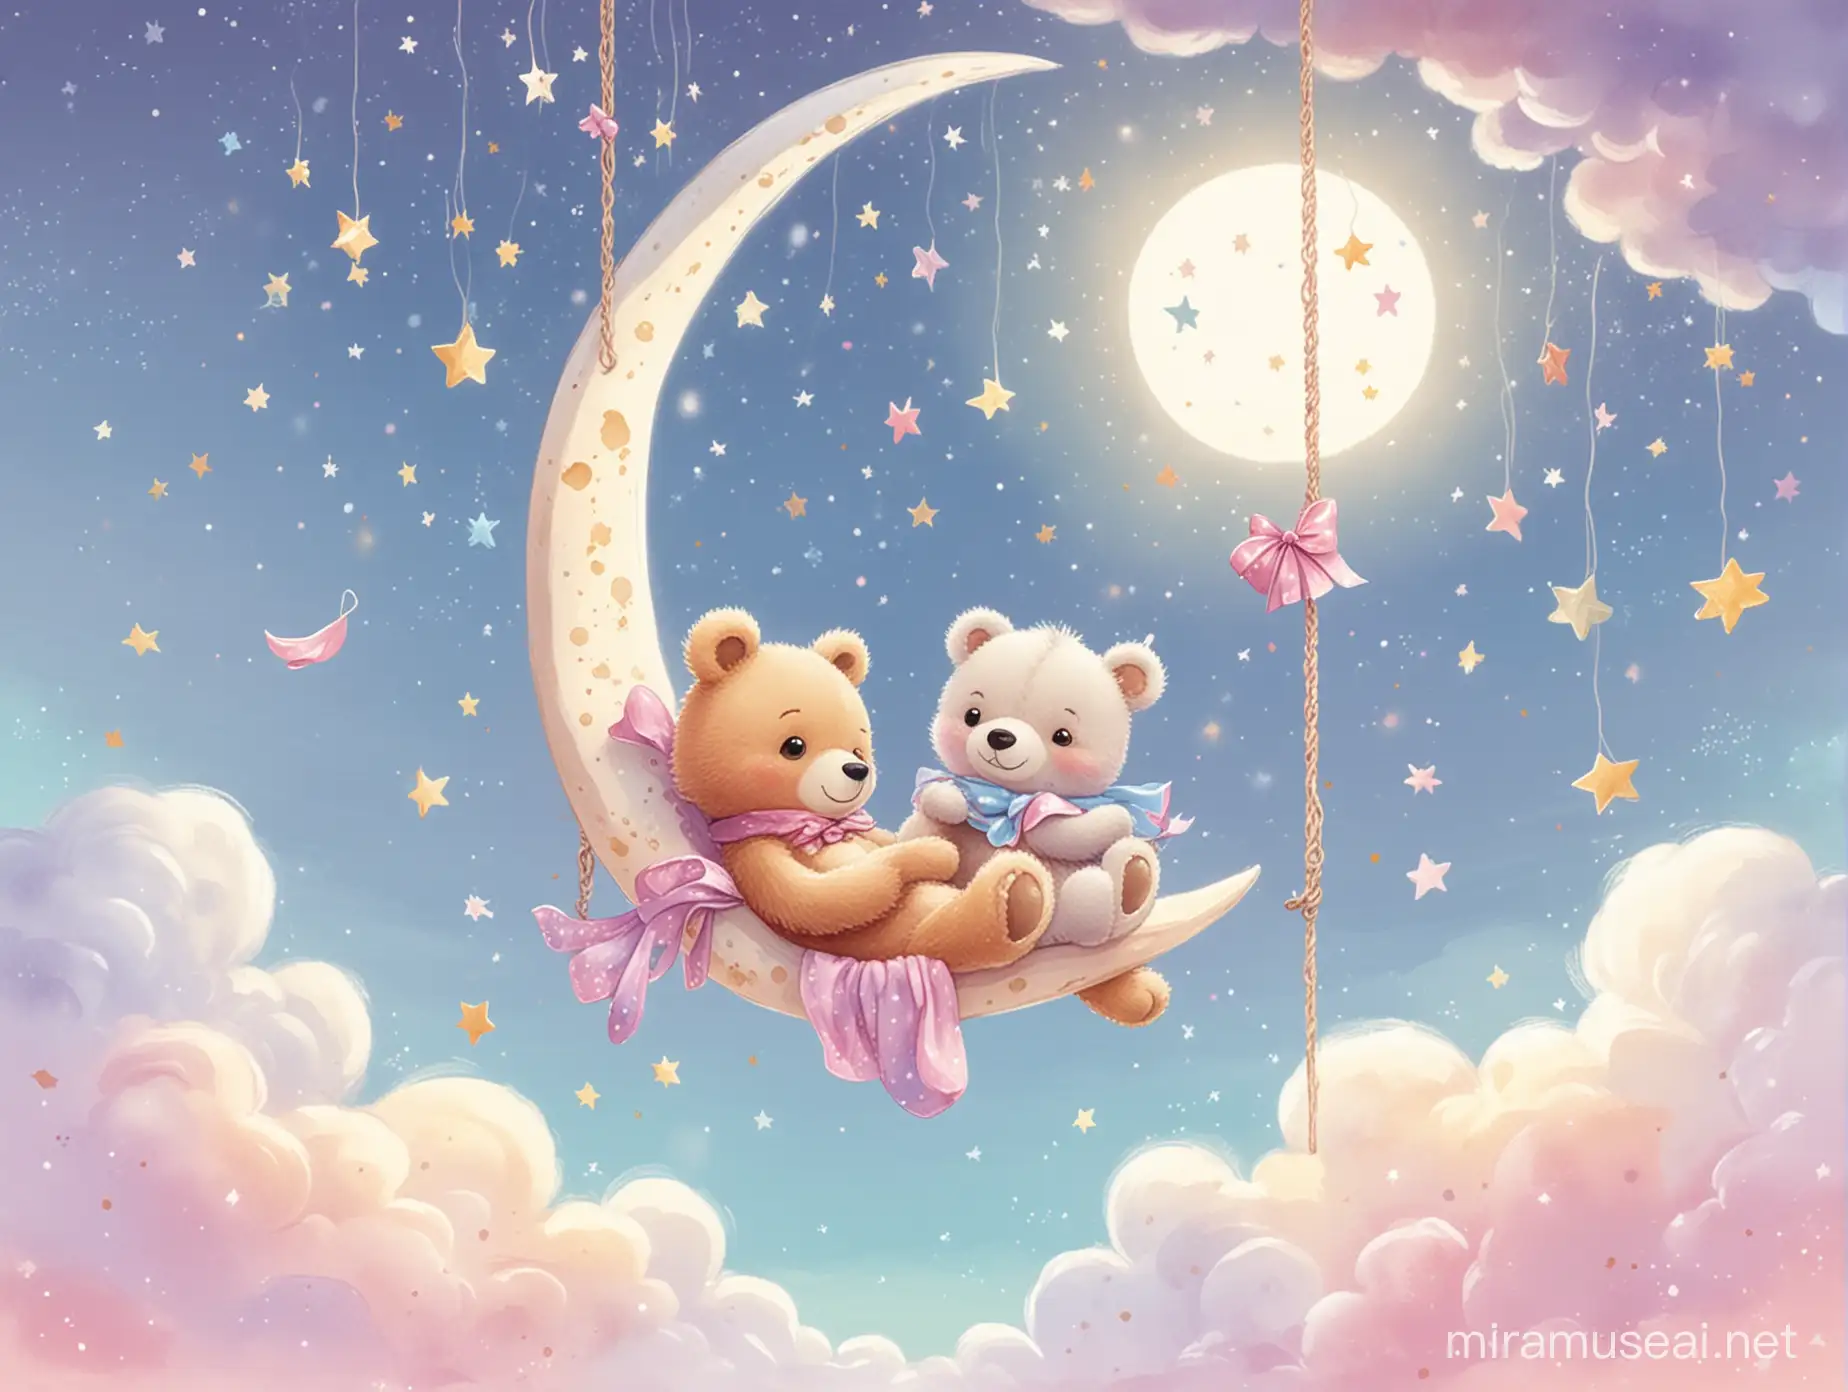 Whimsical Moon Swing with Plush Bear in Colorful Starry Sky